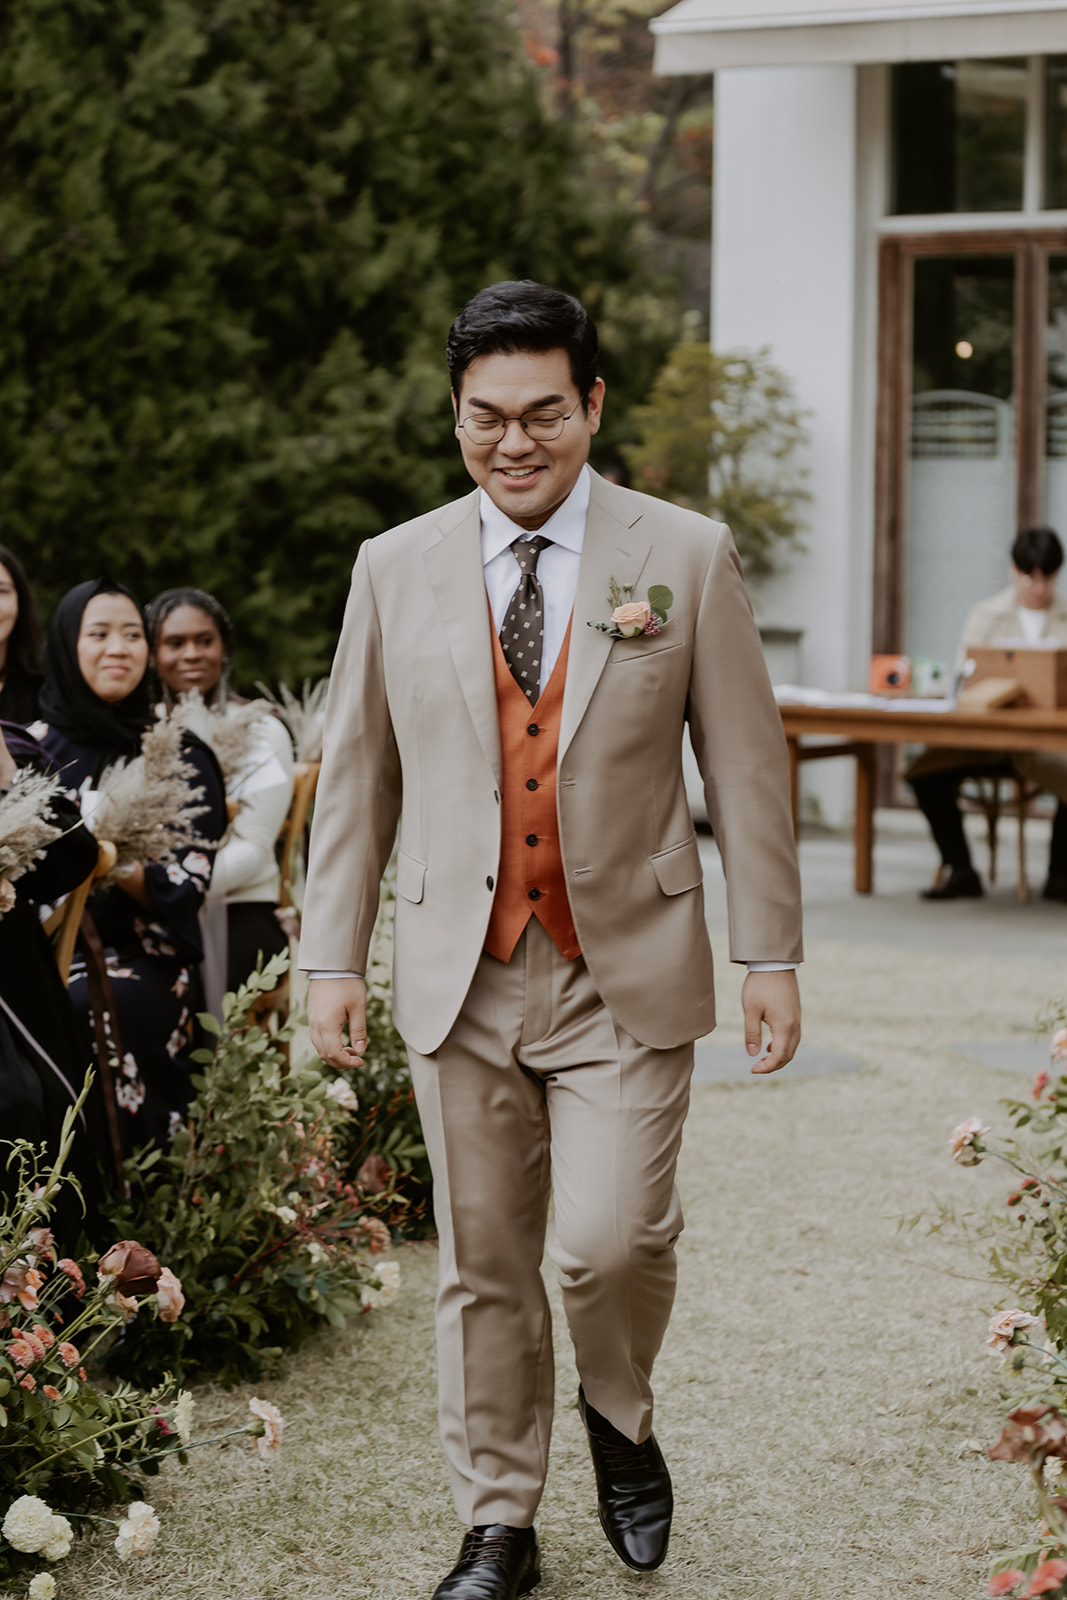 Man in a beige suit smiling as he walks down a garden aisle at a wedding, with seated guests in the background.